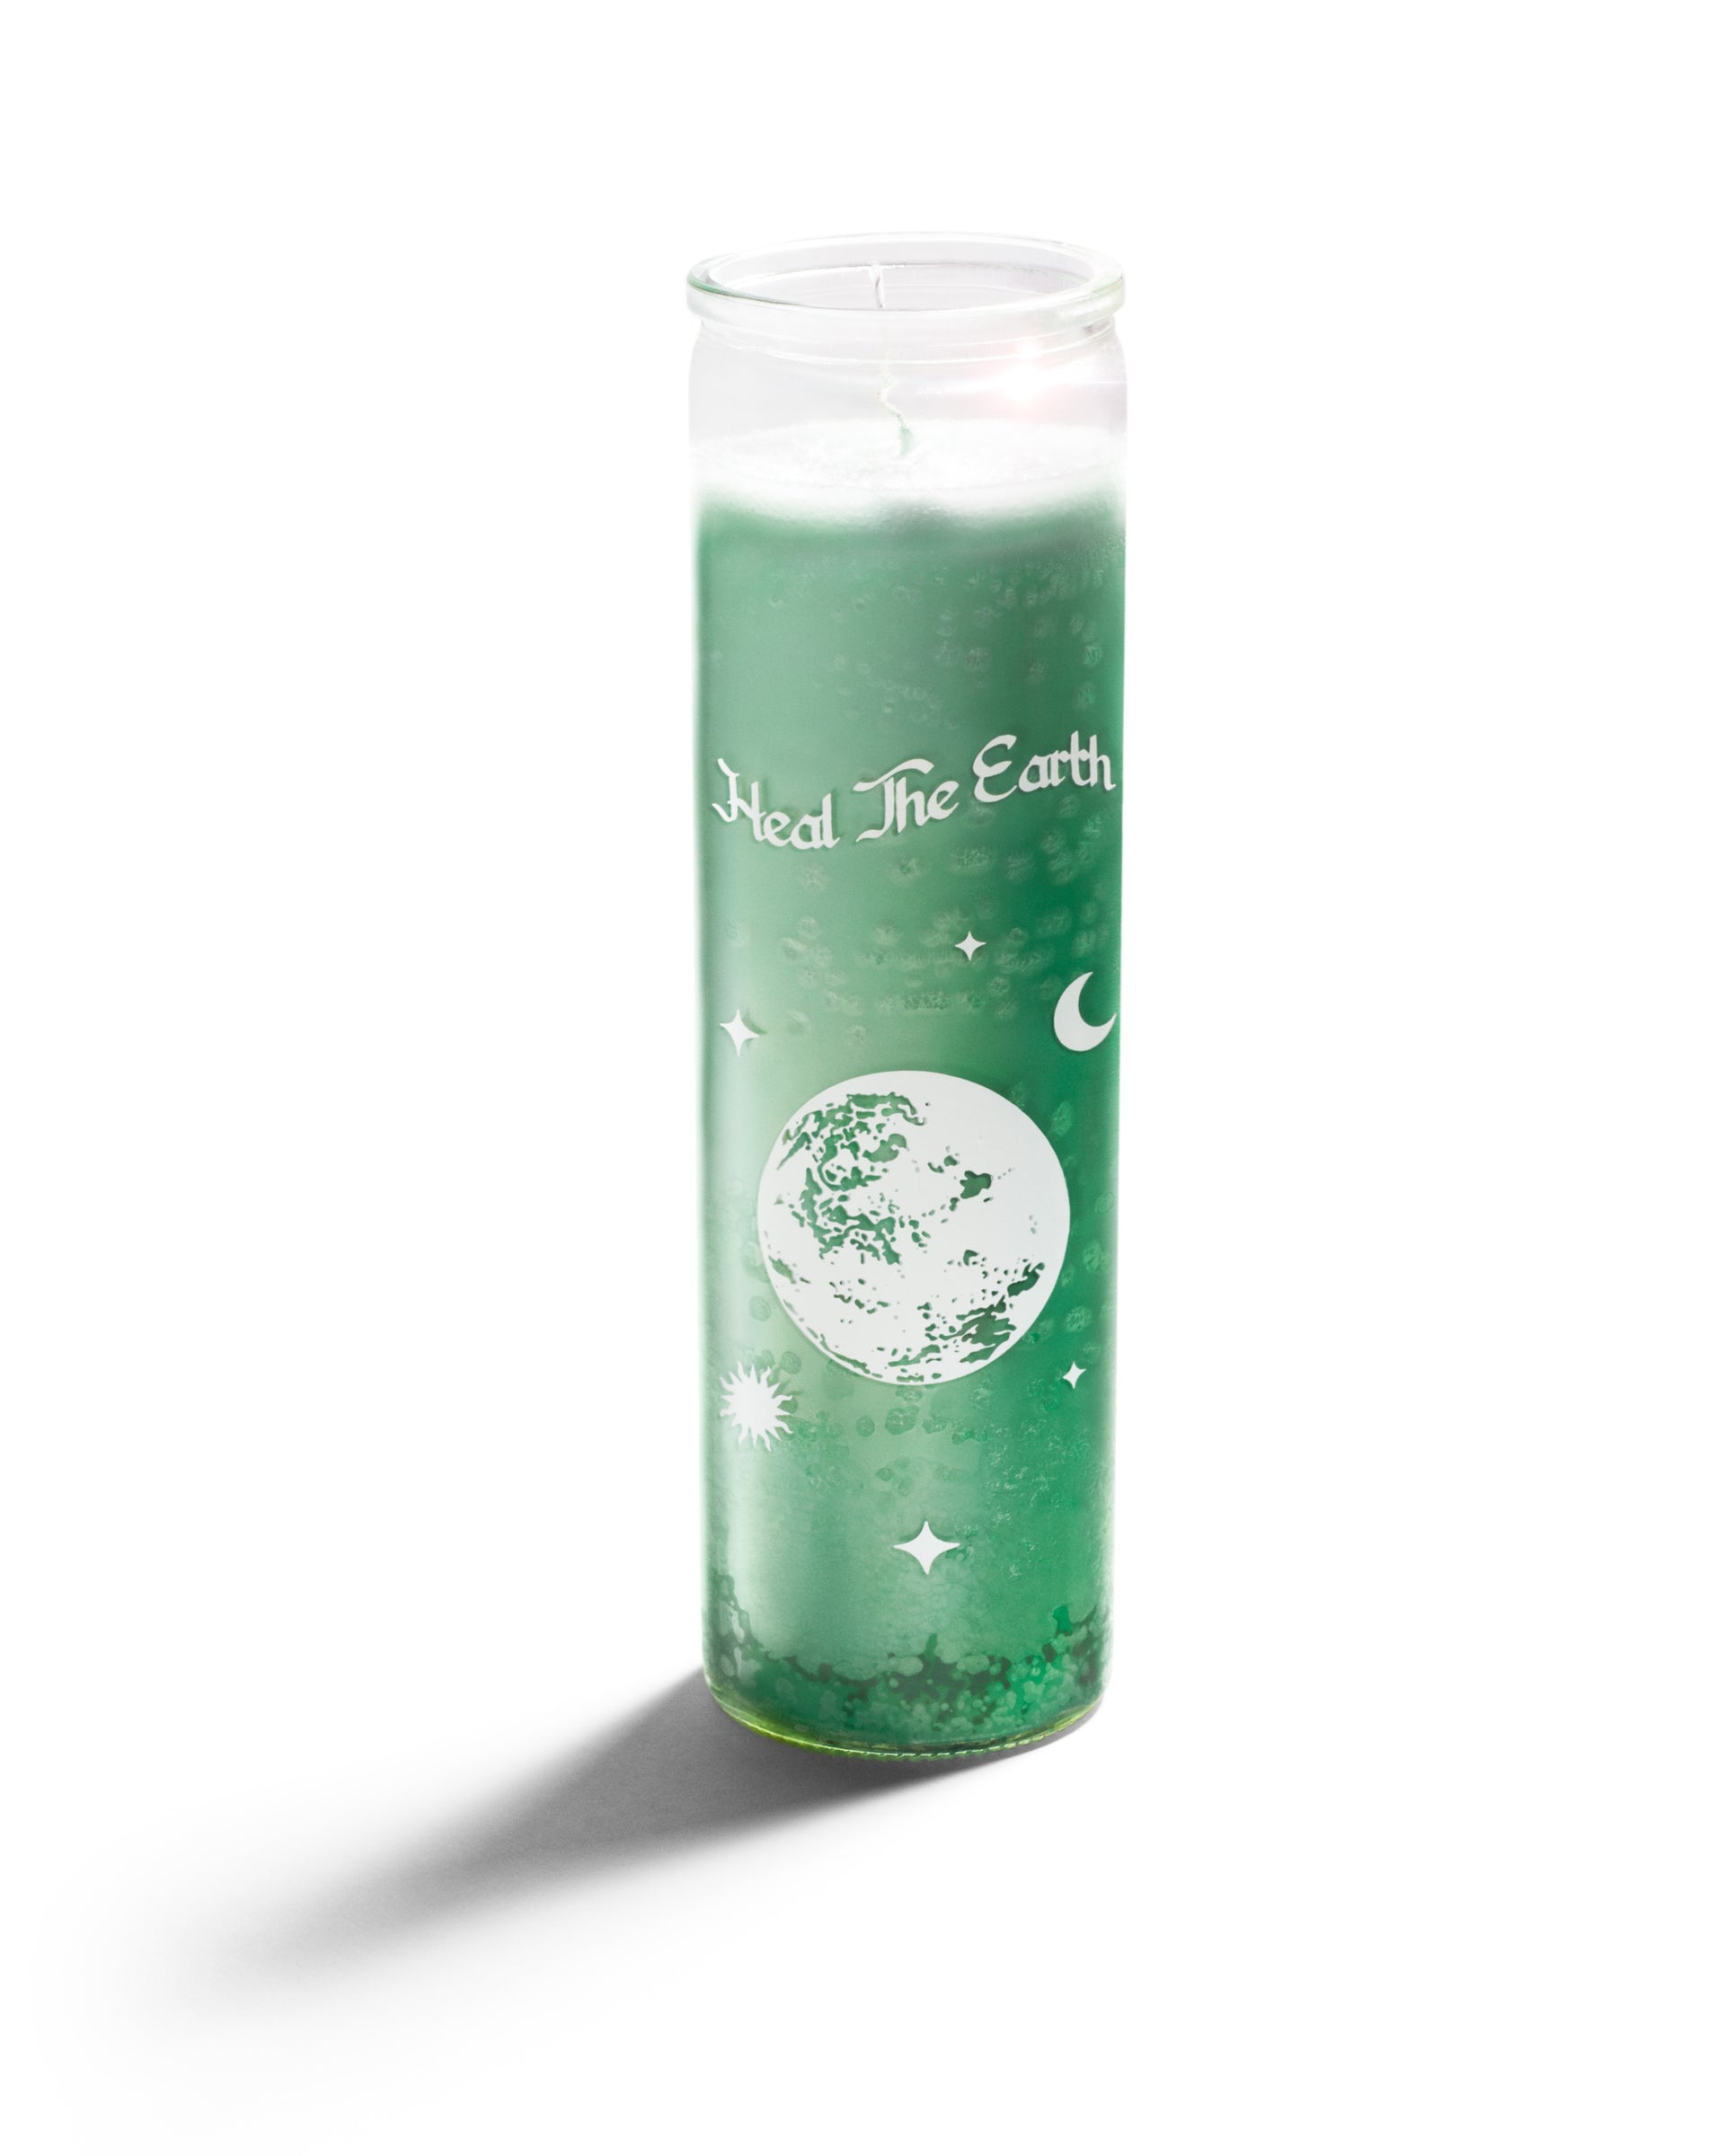 Heal The Earth Candle